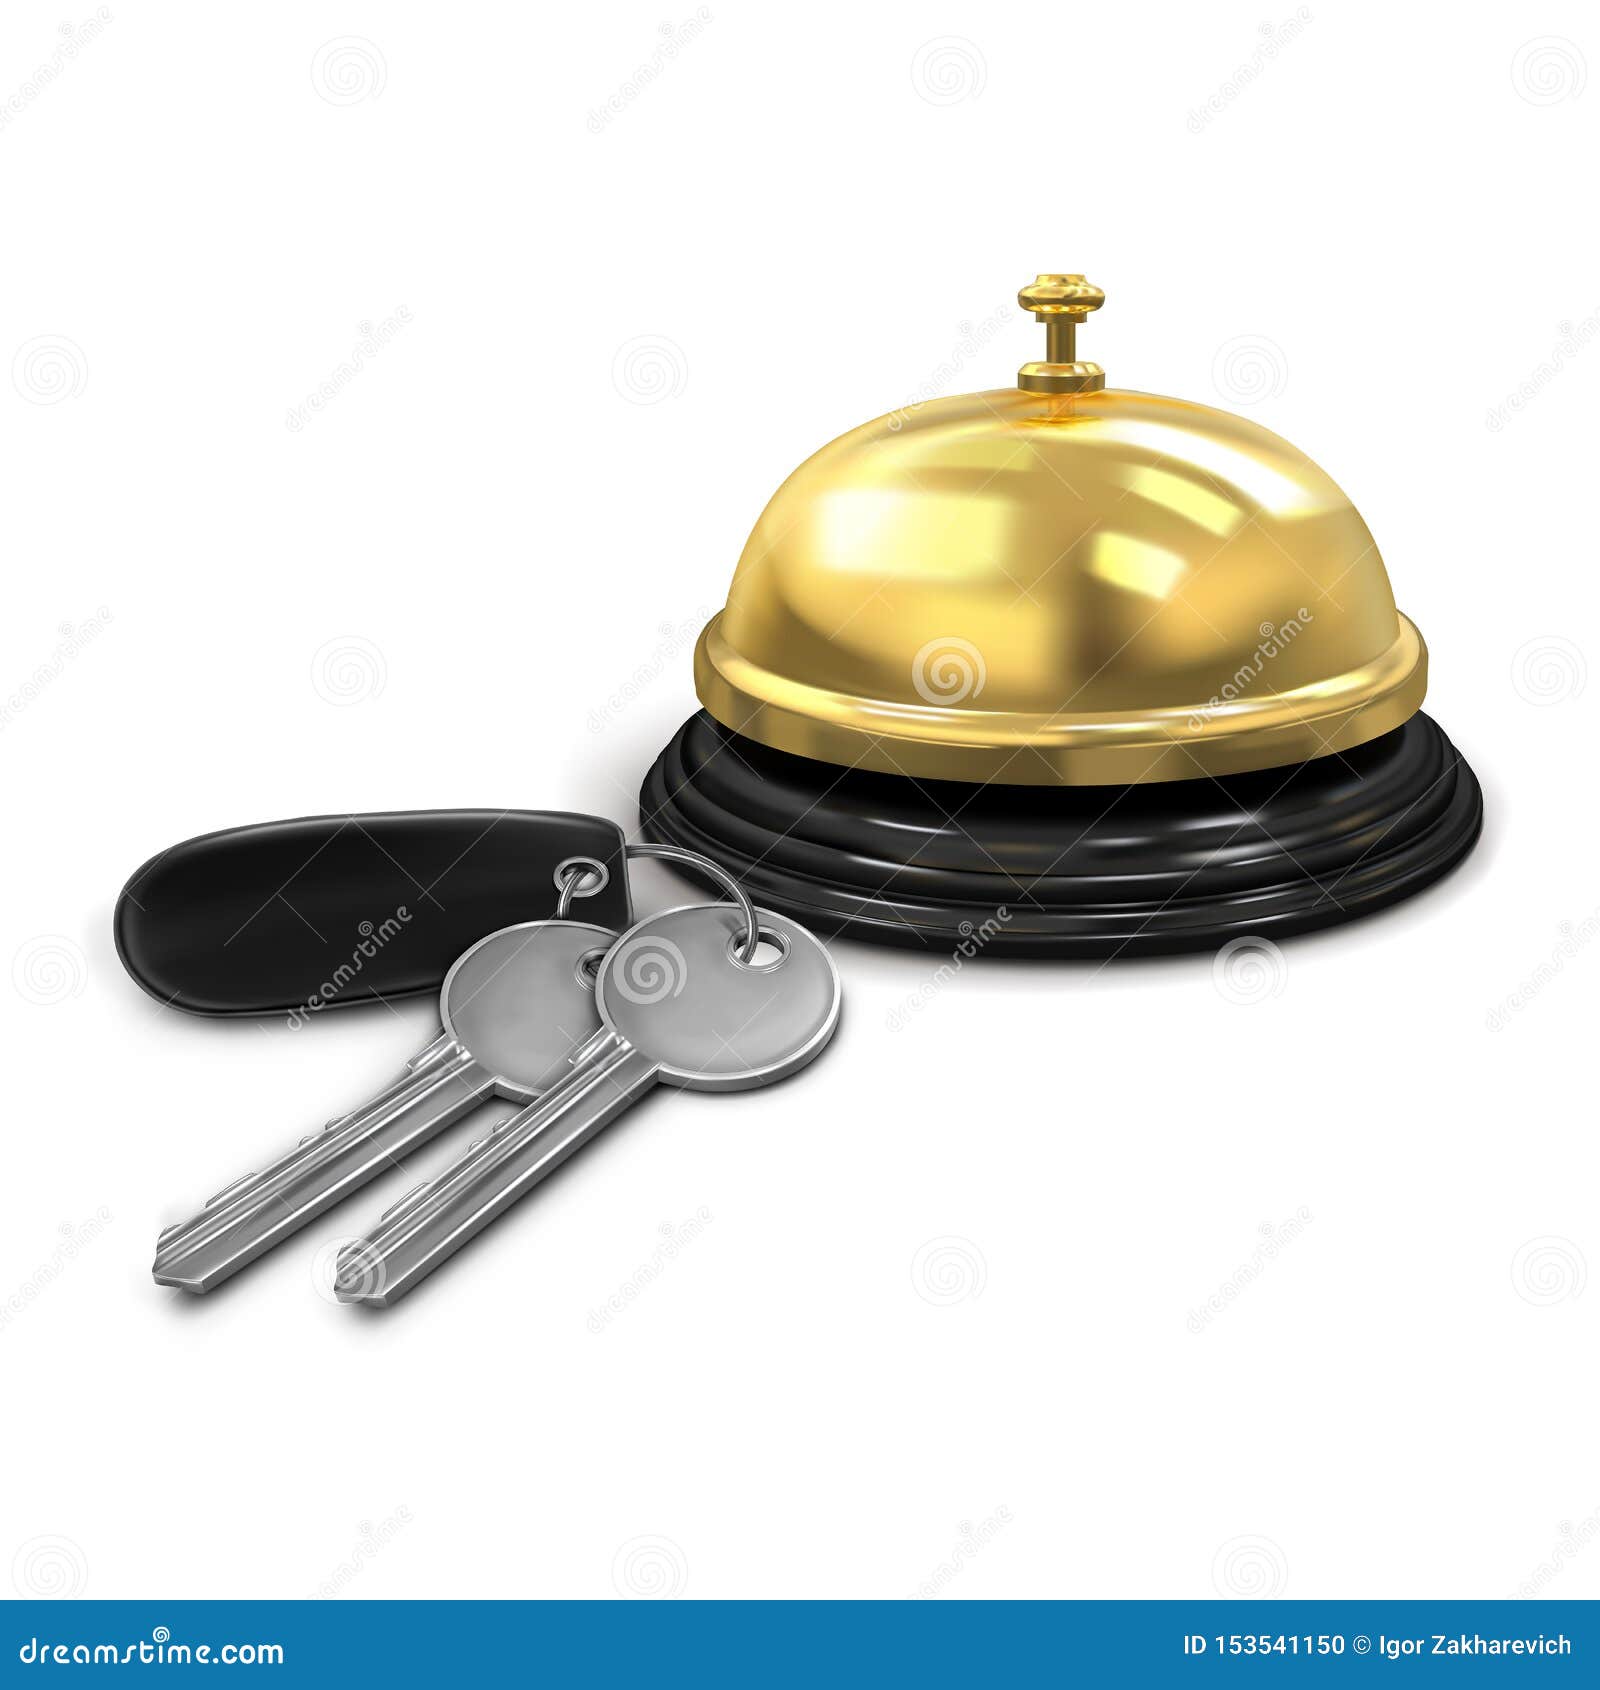 Download Two Silver Keys With A Black Keychain From The Hotel Room And Hotel Service Bell Gold Color ...